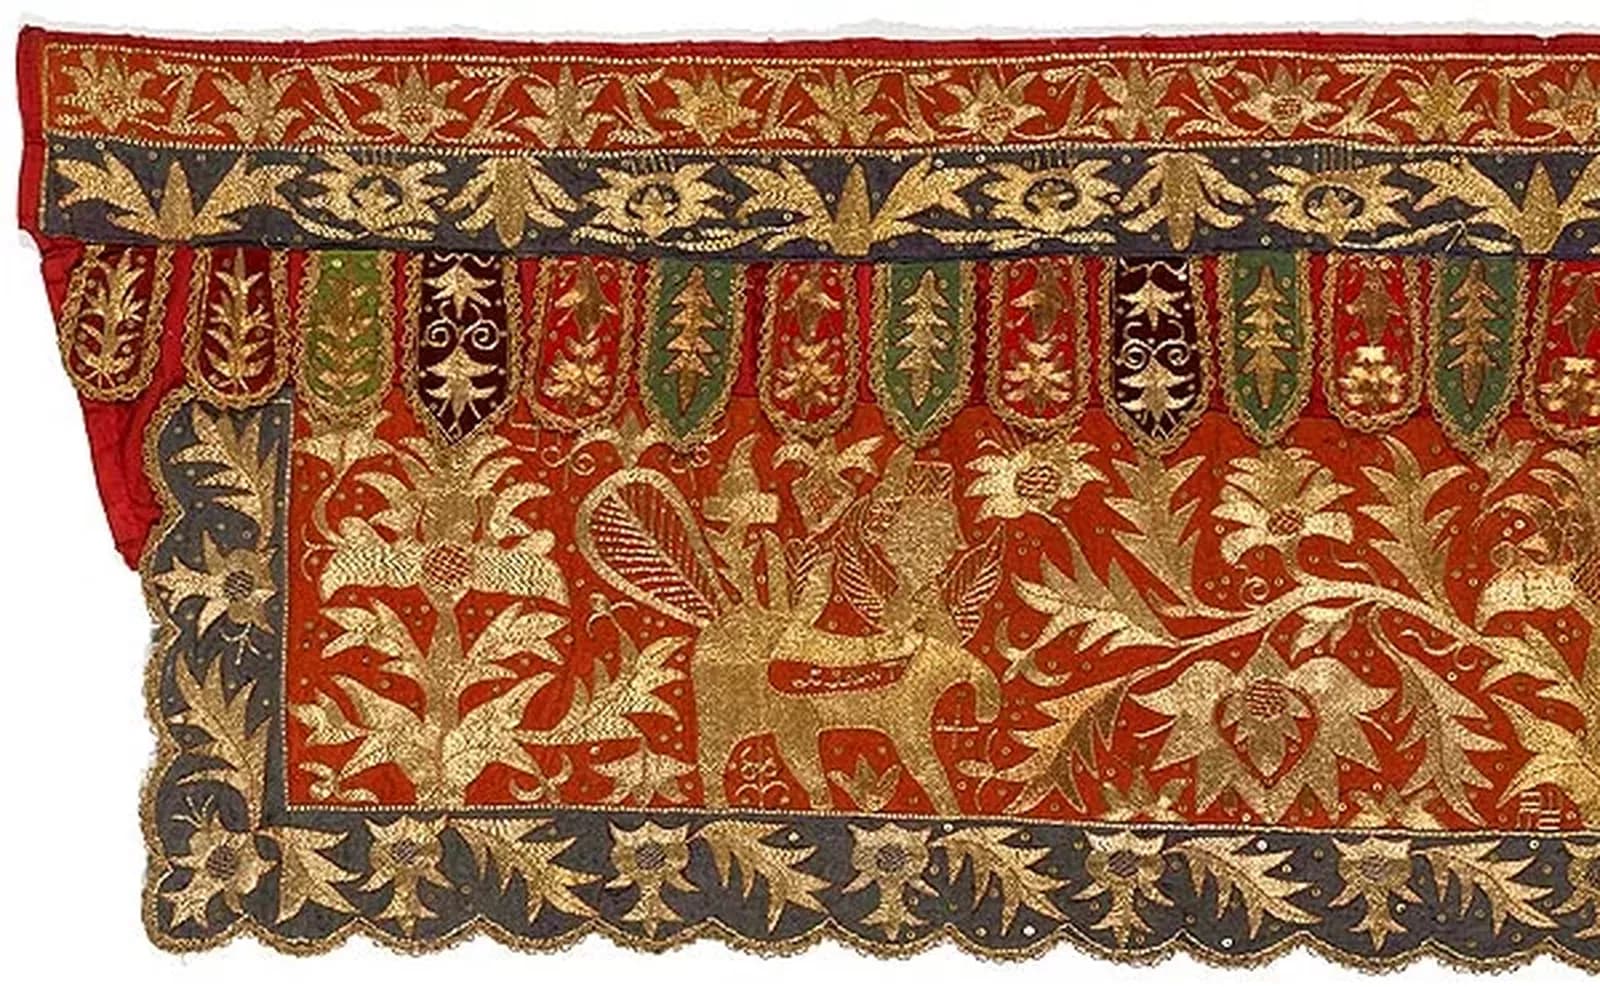 A red, green and blue tapestry richly embroidered with gold thread forming flowering trees and a pair of bouraq, a mythical winged animal